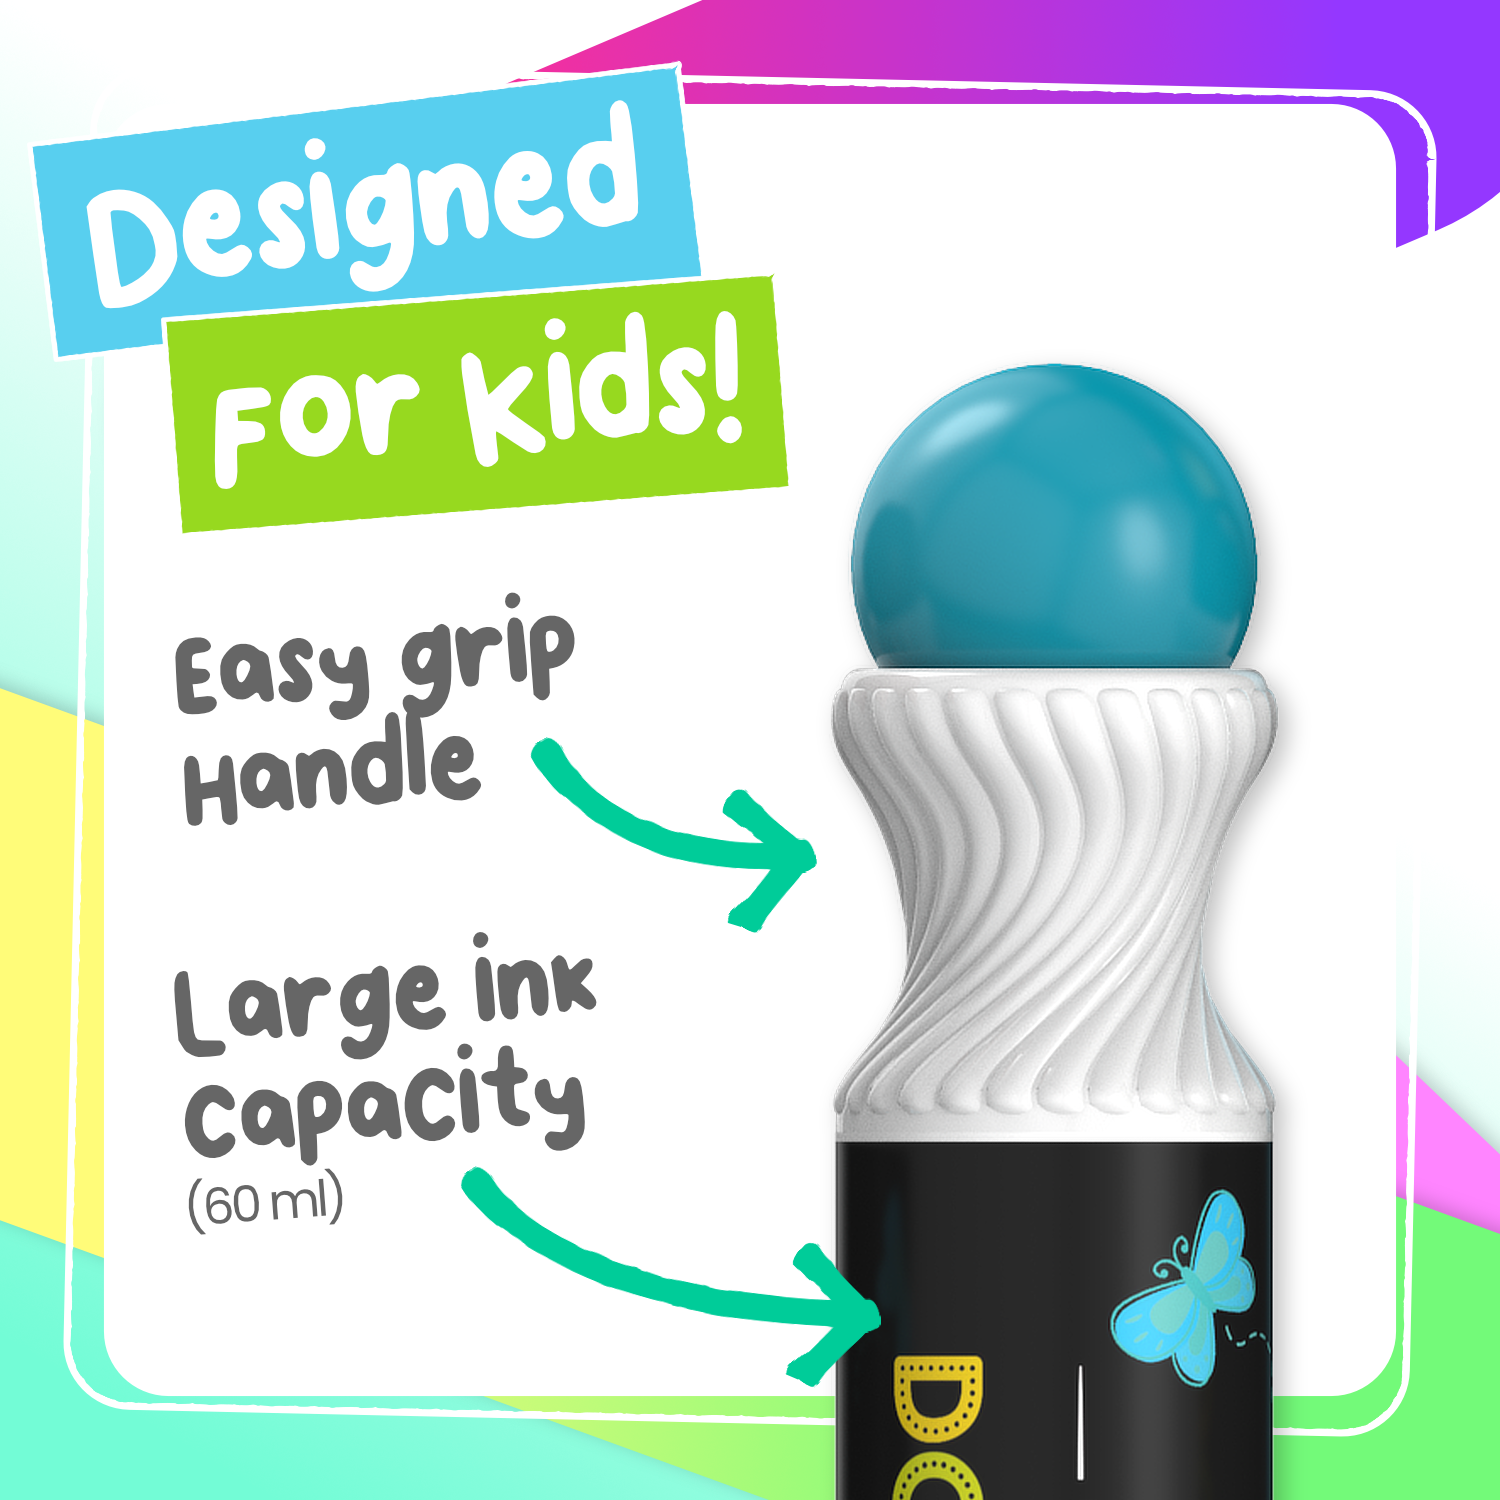  Cameron Frank Products Dot Markers for Toddlers 1-3 - Set of 8  Dauber Dawgs Washable Dot Paints with 3 Activity Book PDFs